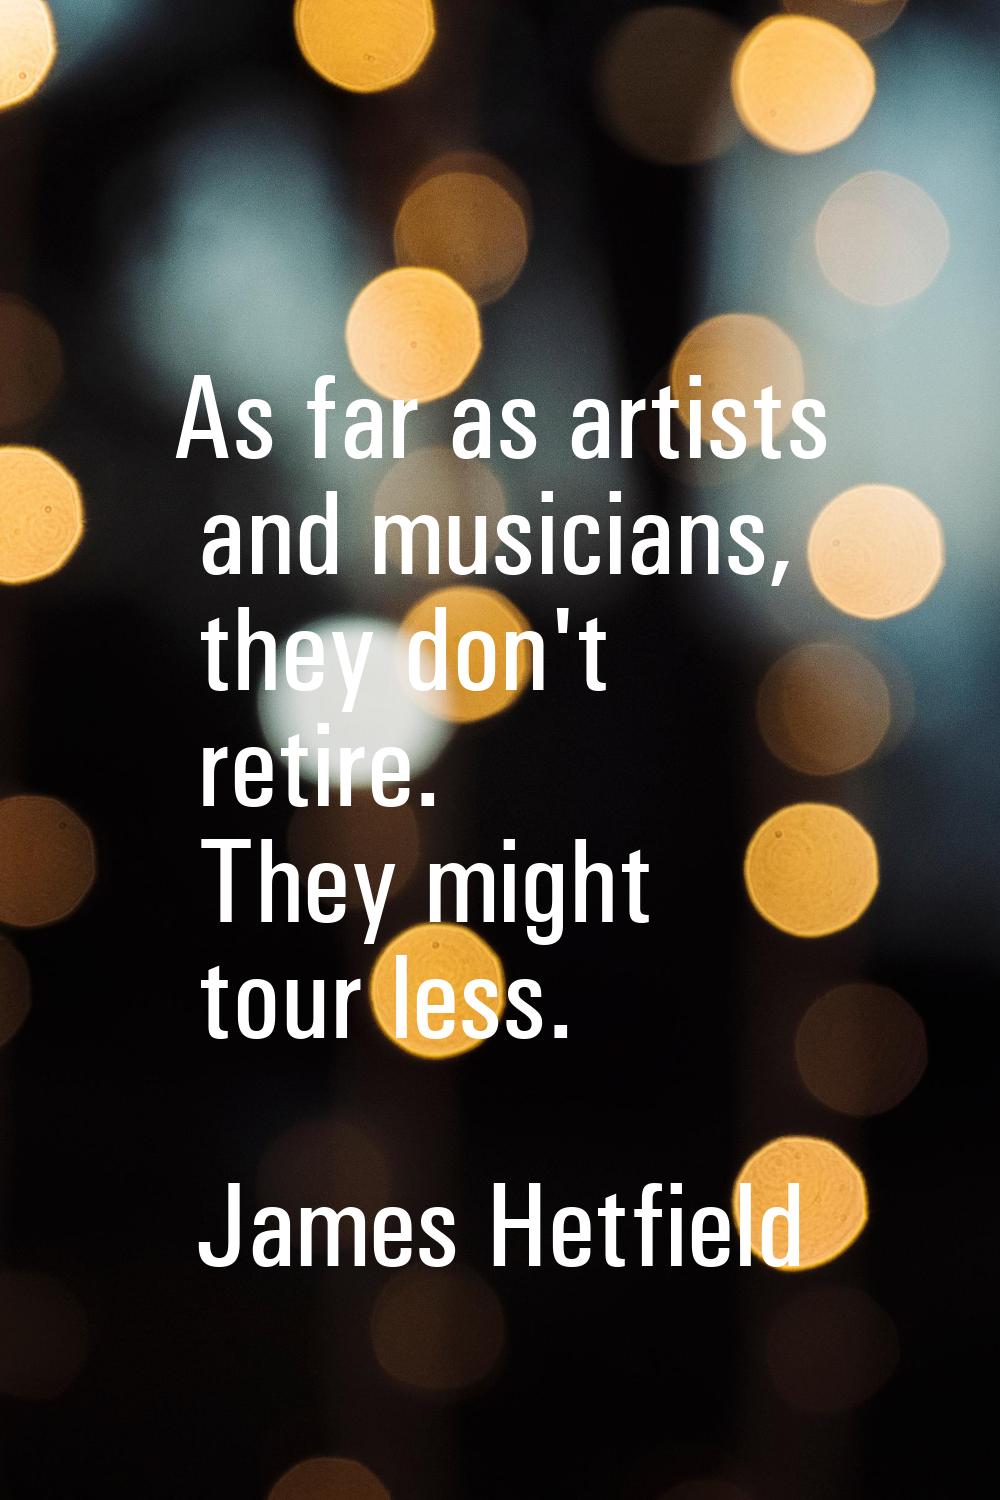 As far as artists and musicians, they don't retire. They might tour less.